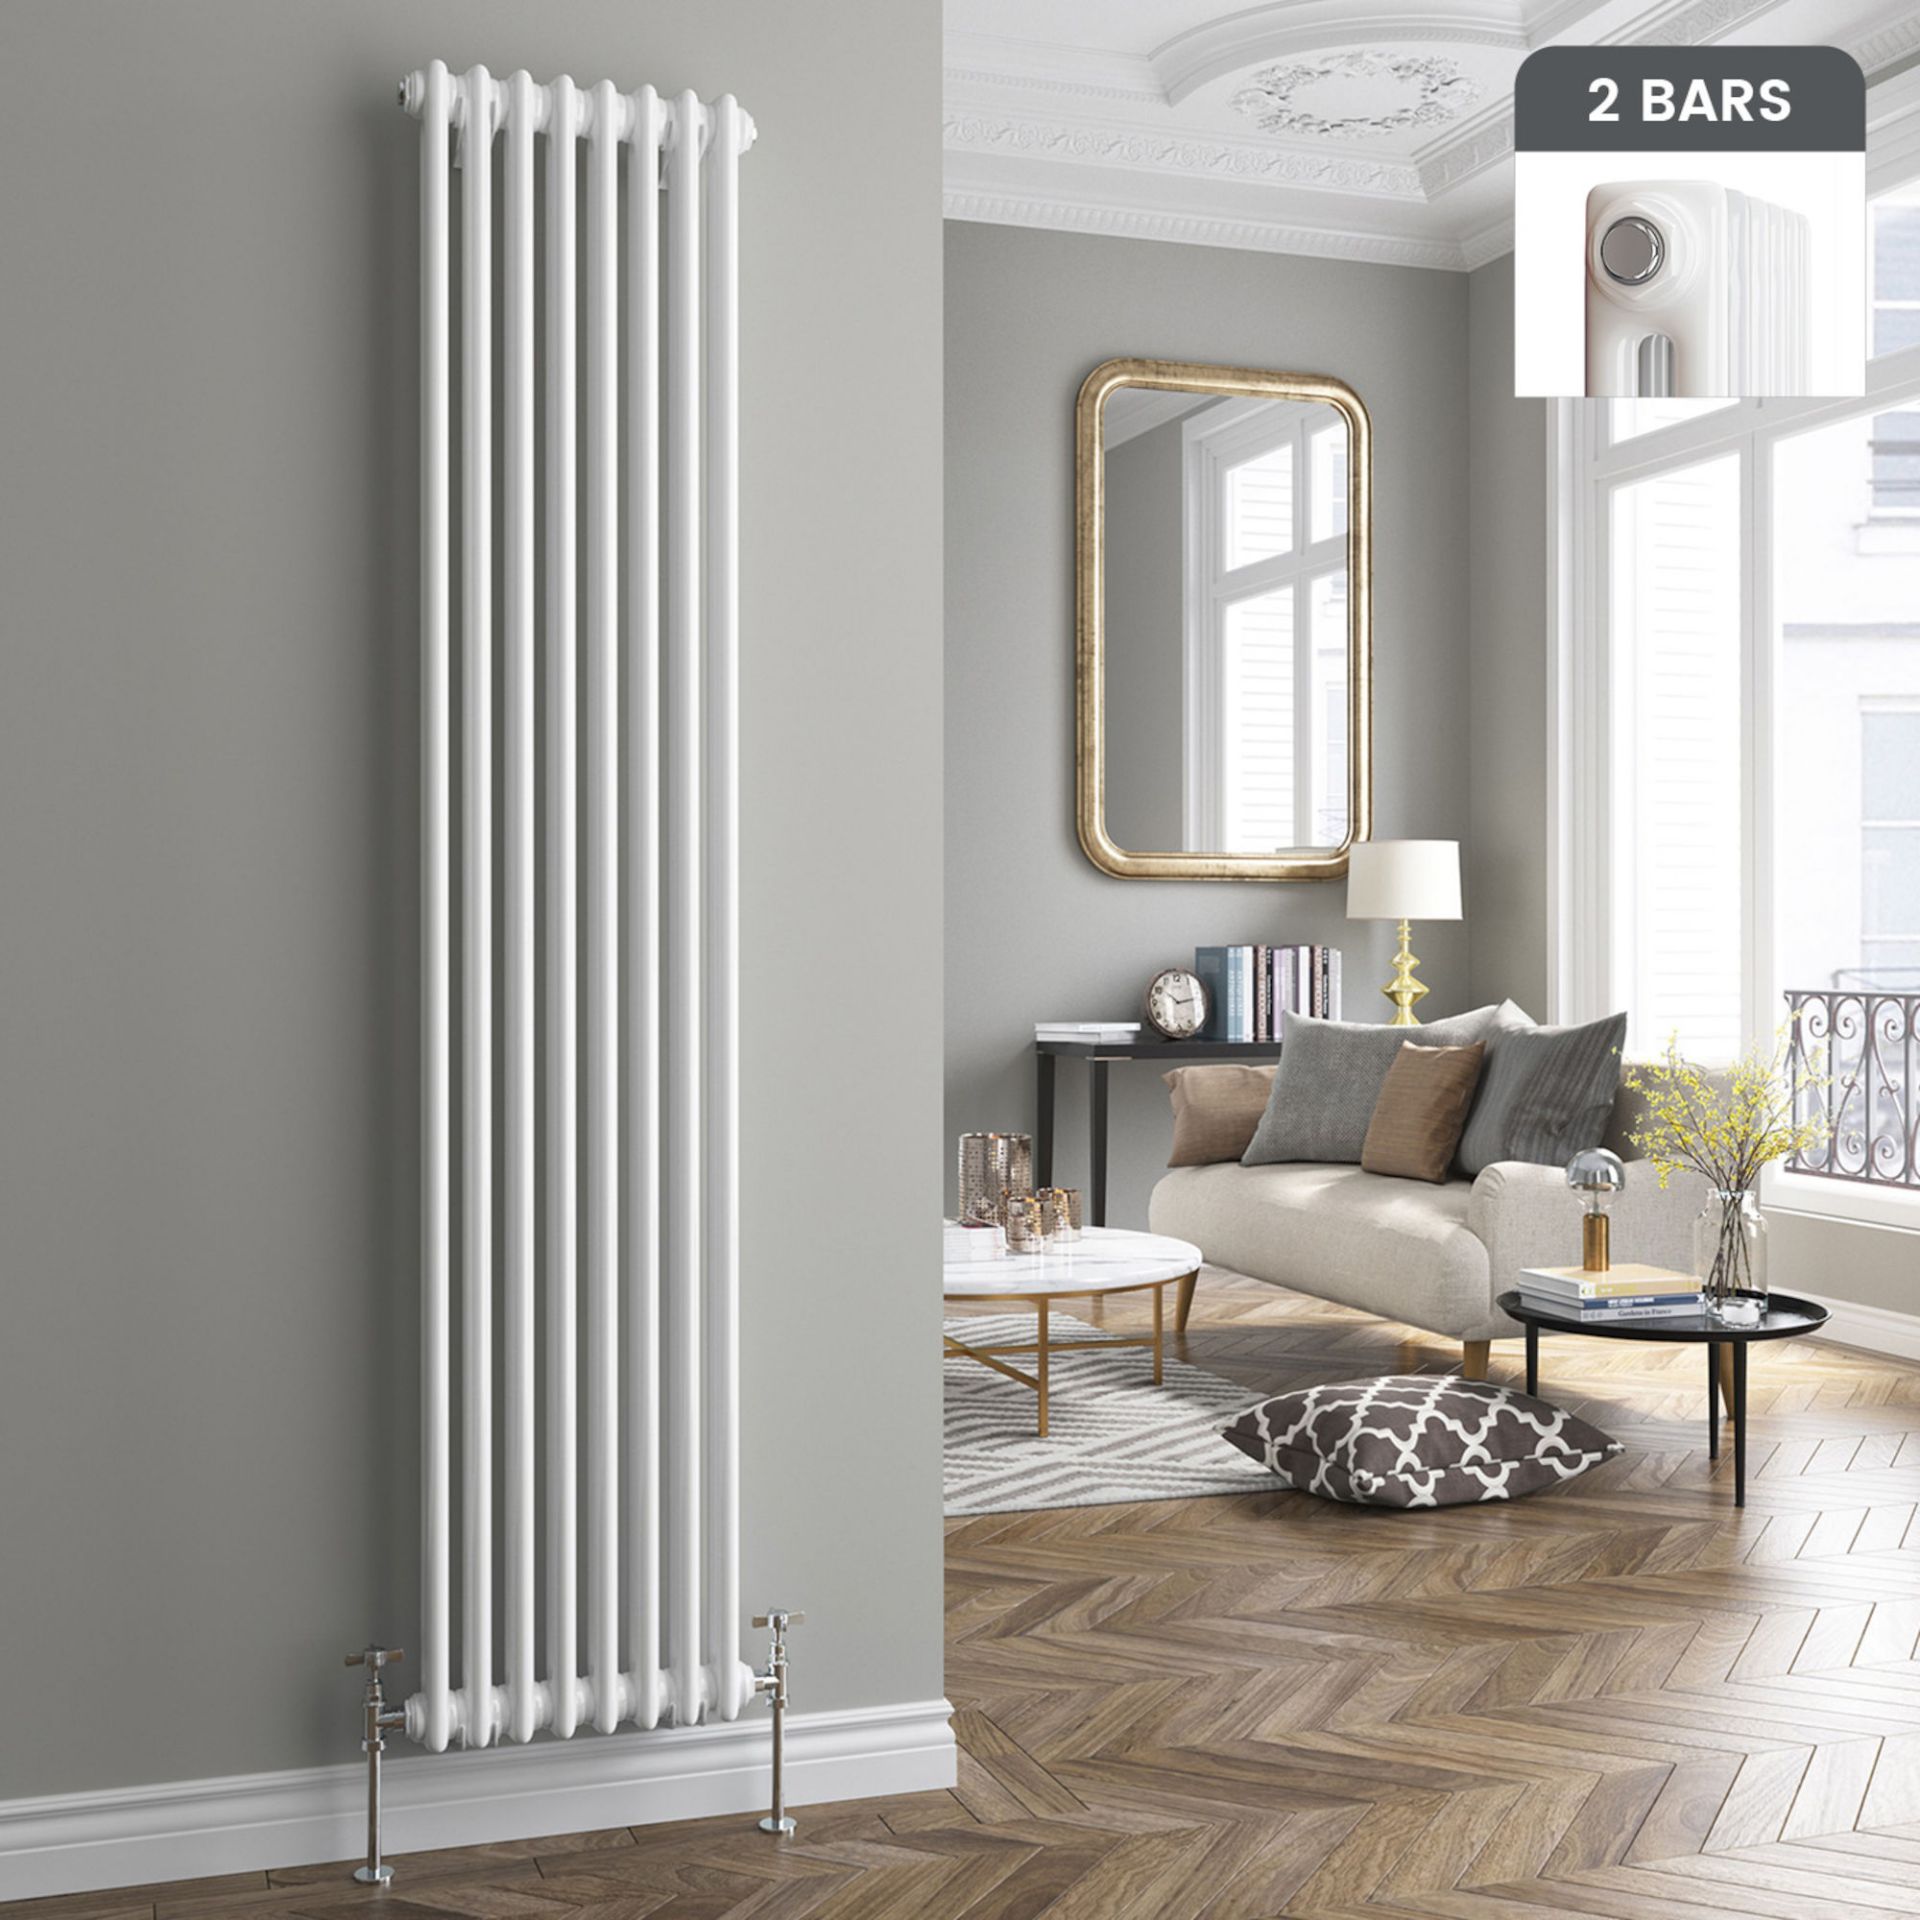 (UK113) 2000x398mm White Double Panel Vertical Colosseum Traditional Radiator. RRP £328.99. Made